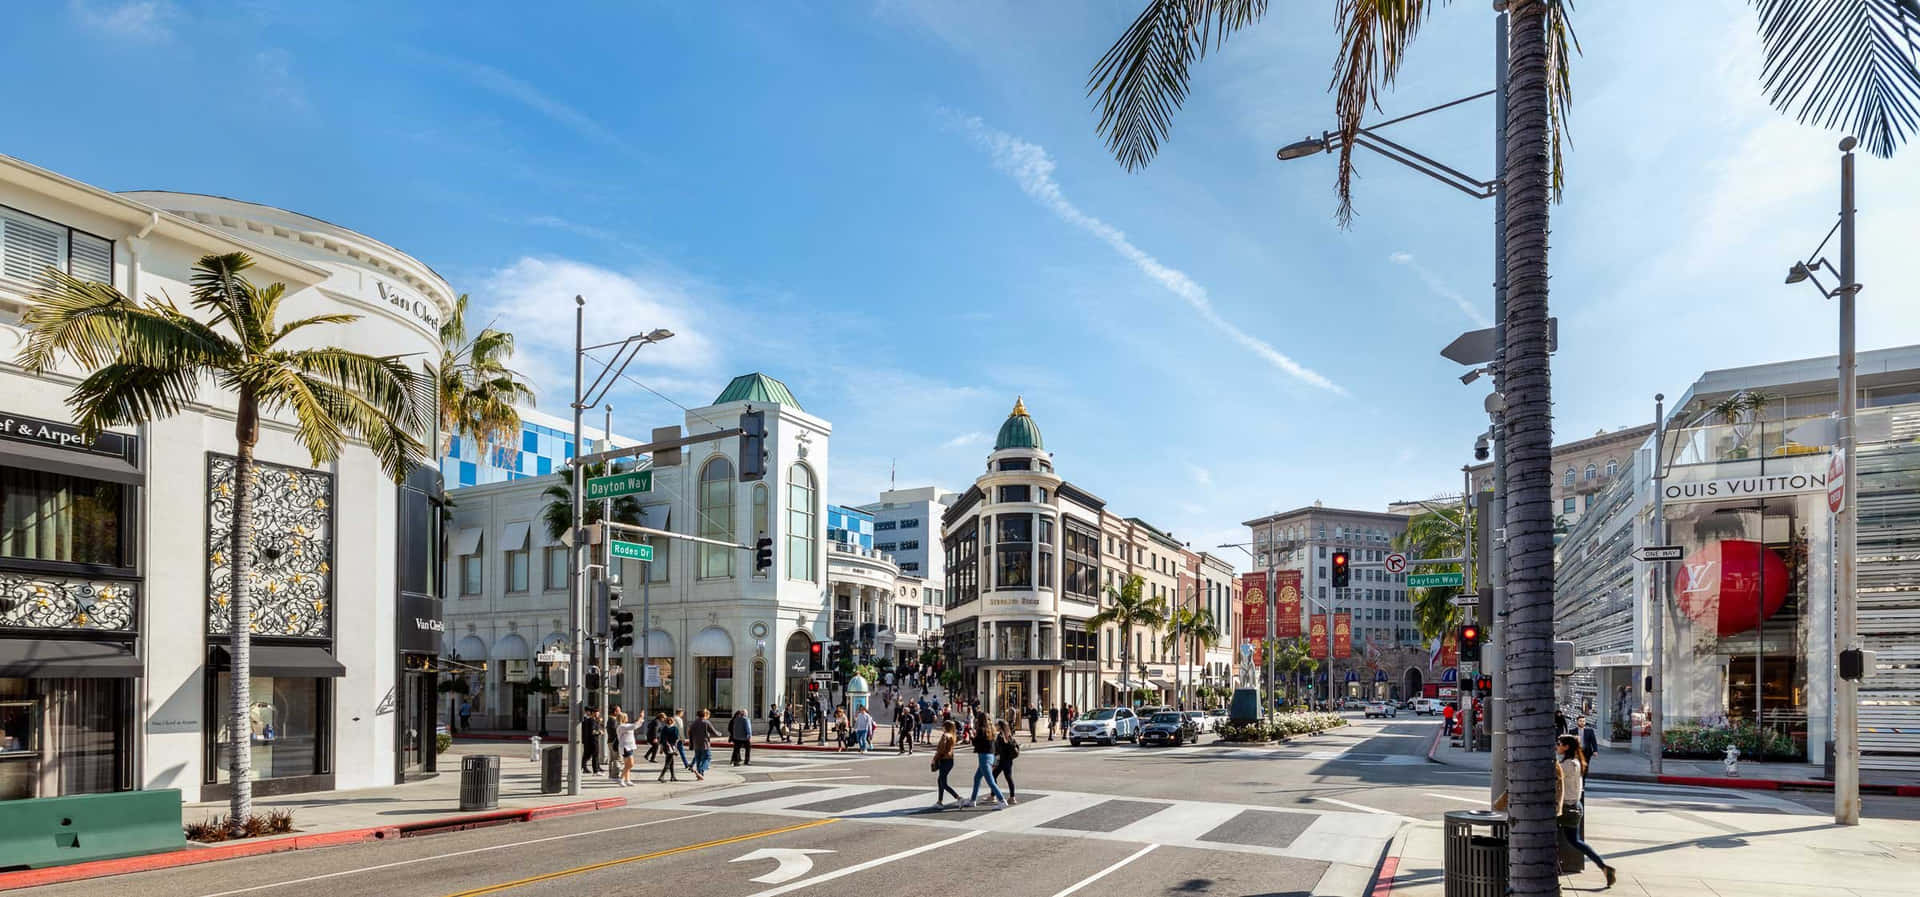 Download Beverly Hills Luxury Shopping District Wallpaper | Wallpapers.com